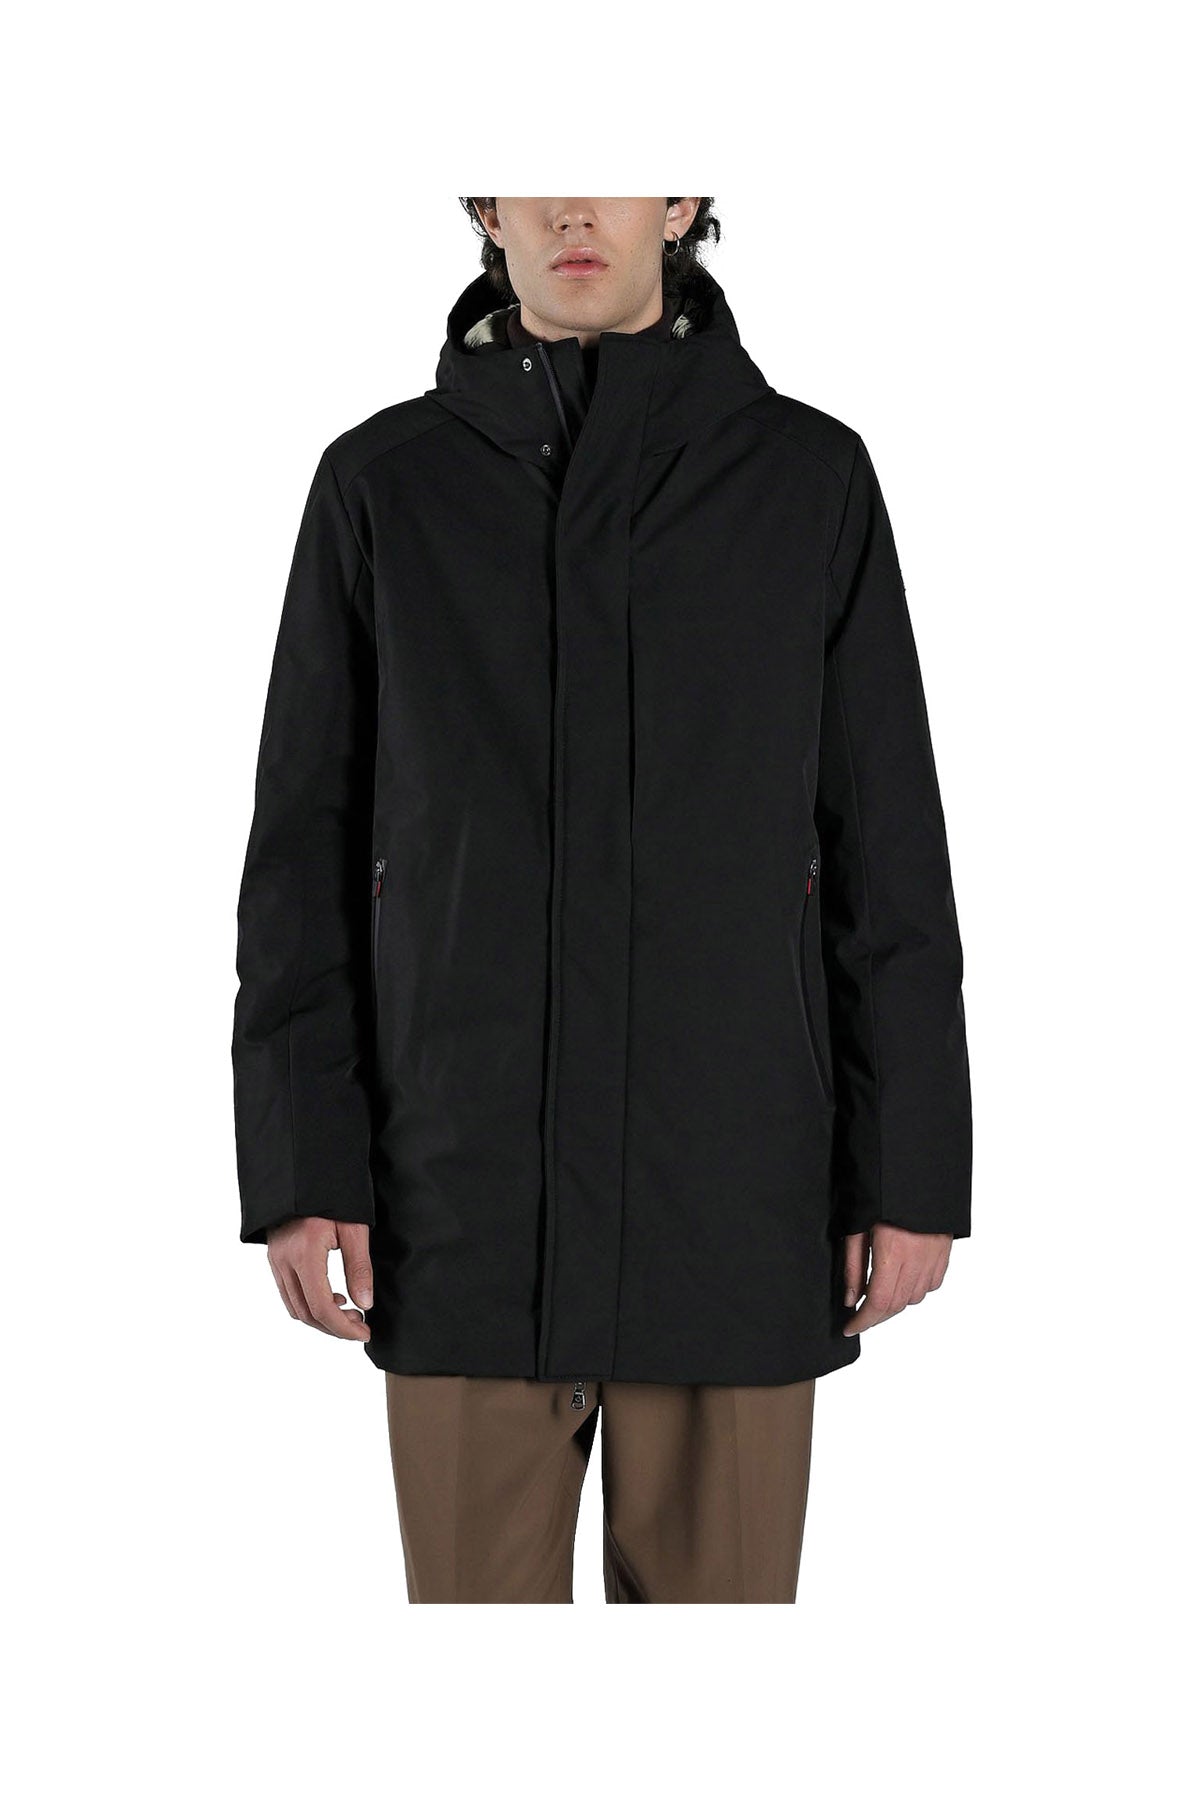 Canadian Giacca Uomo Parka City Nero CAN*G223352